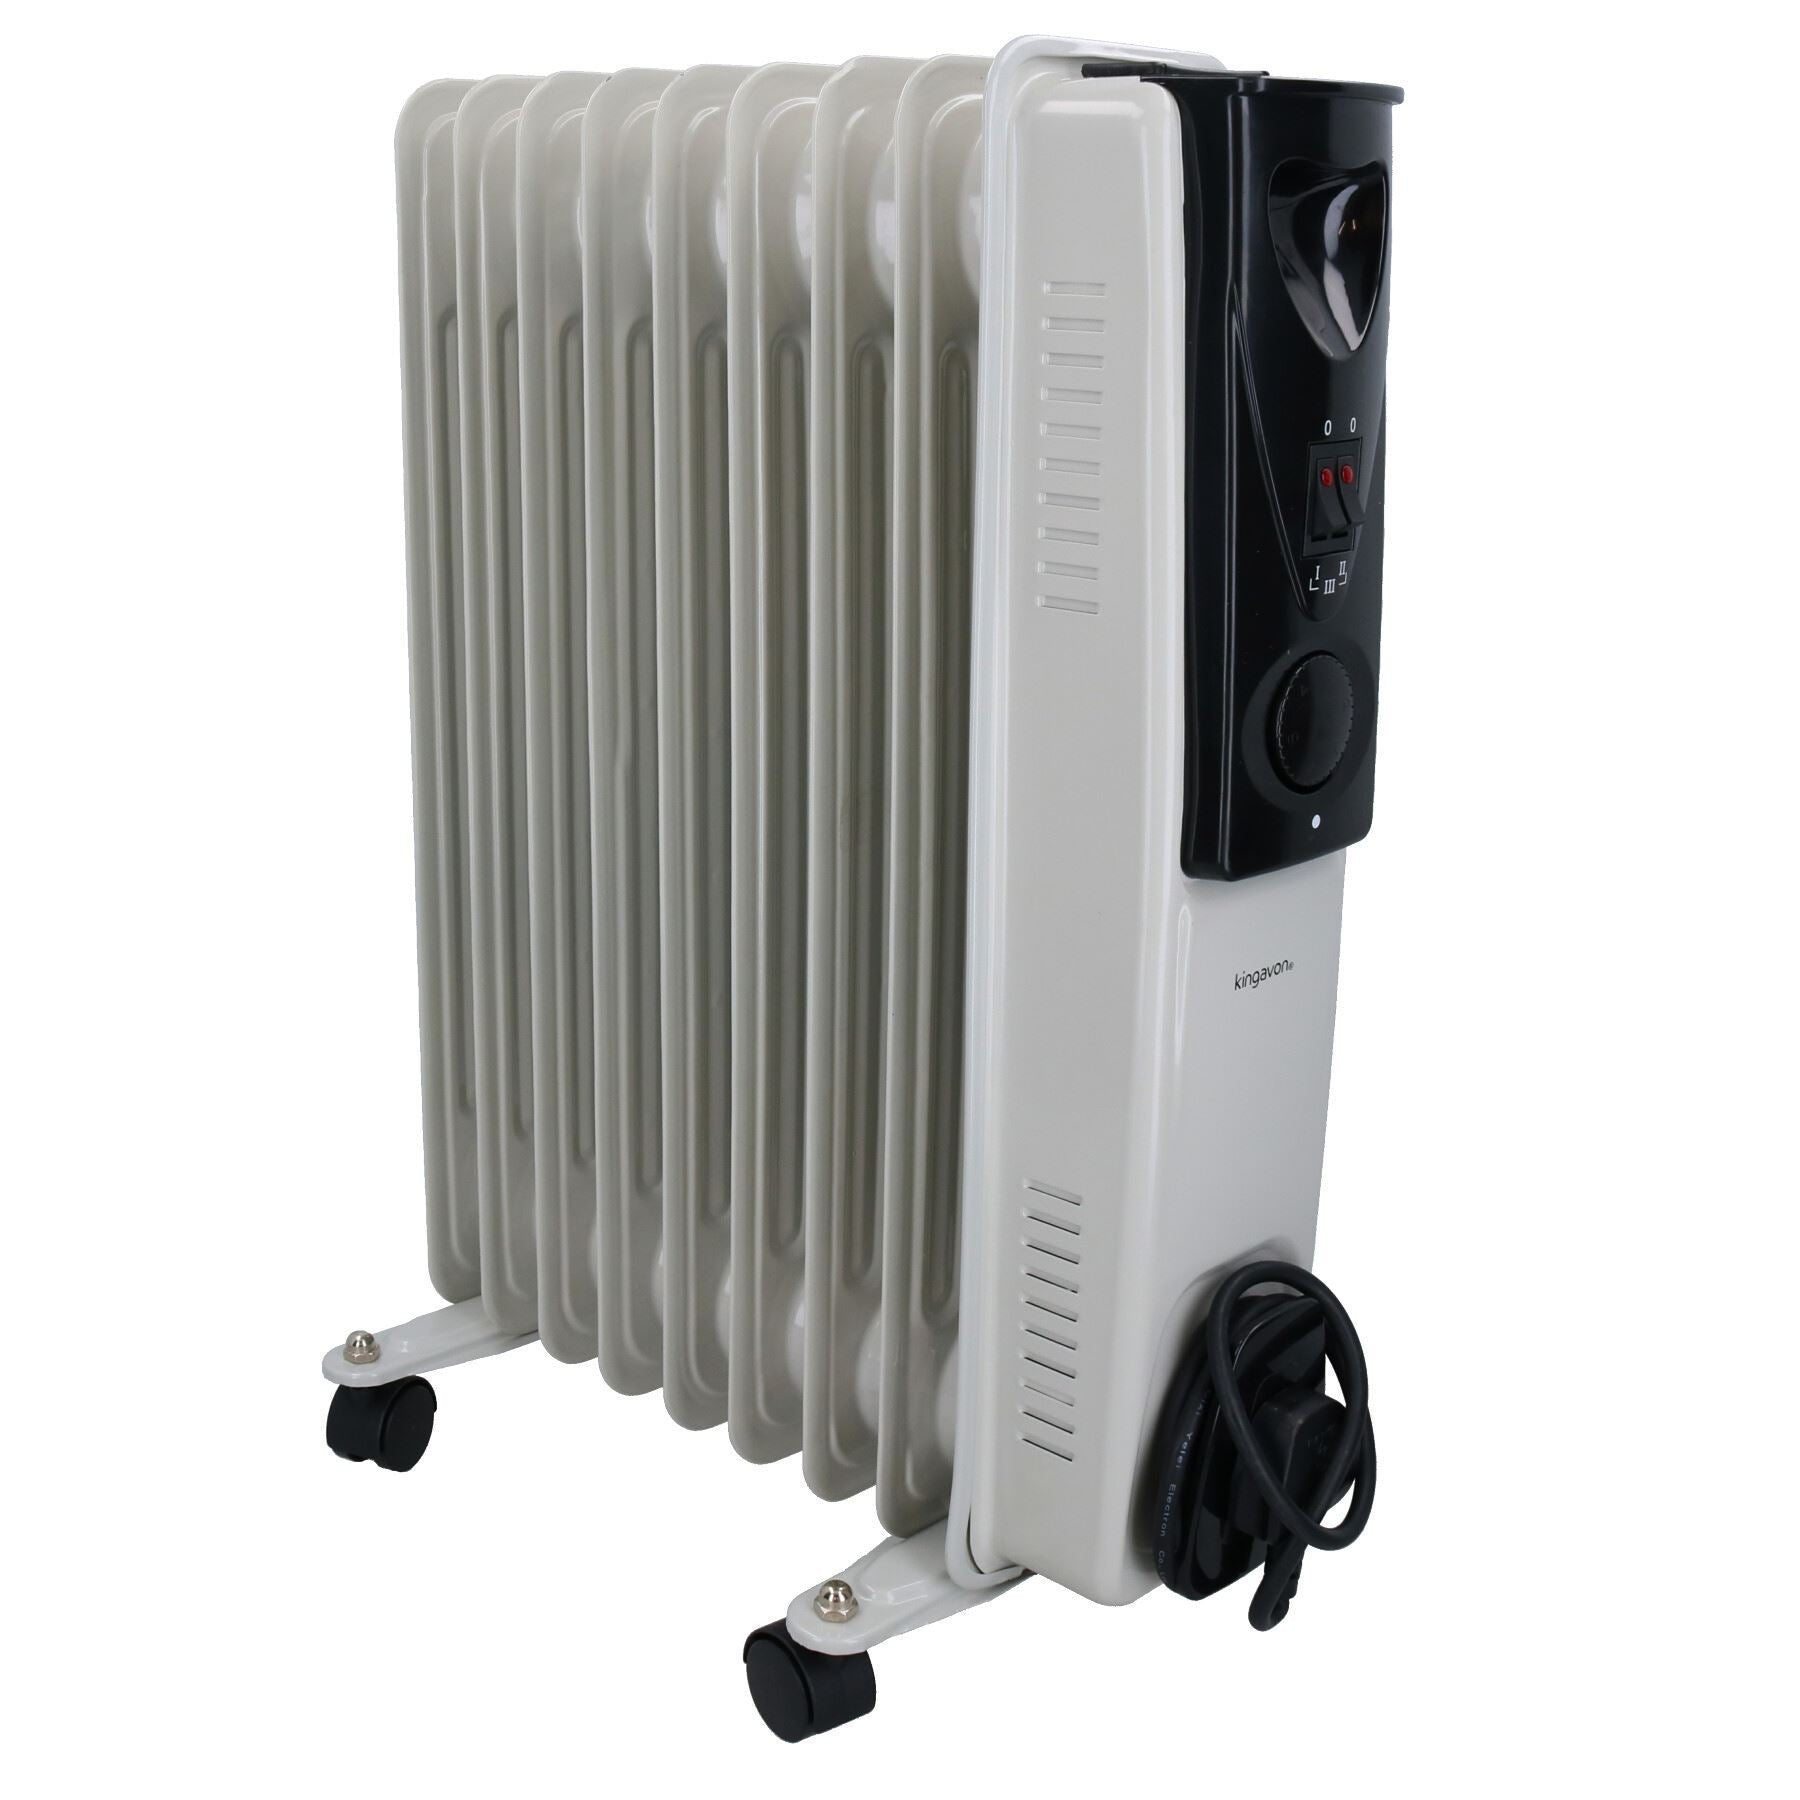 2KW 9 Fin Slim line Oil Filled Radiator Heater With Adjustable Thermostat White